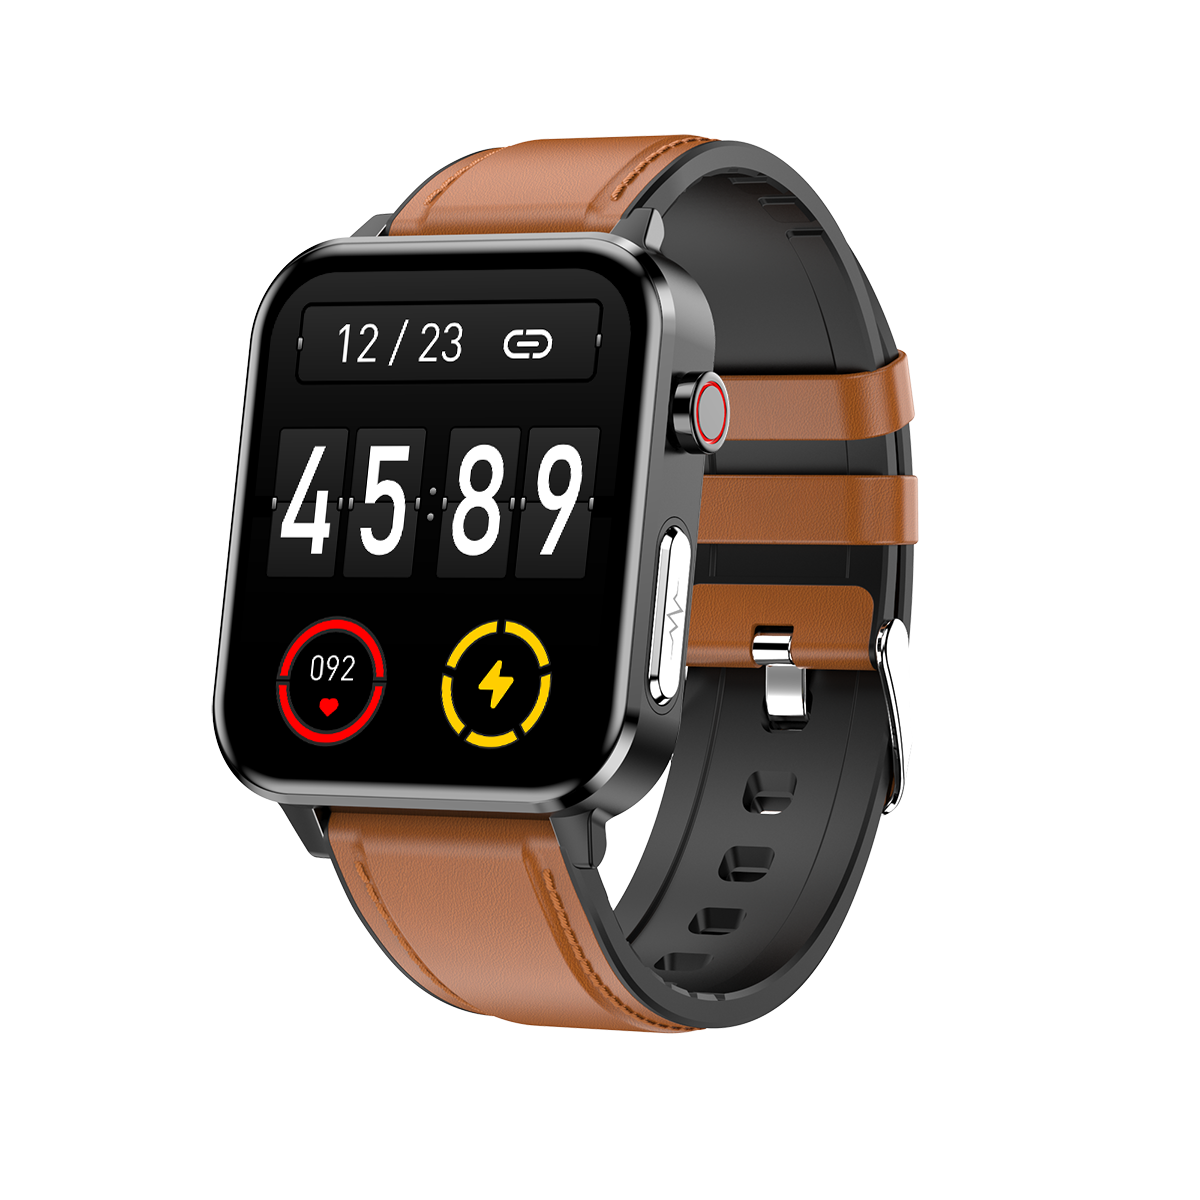 E86 Fitness Digital Smart Watch Phone with Touch Display and ECG Healthy Inspection